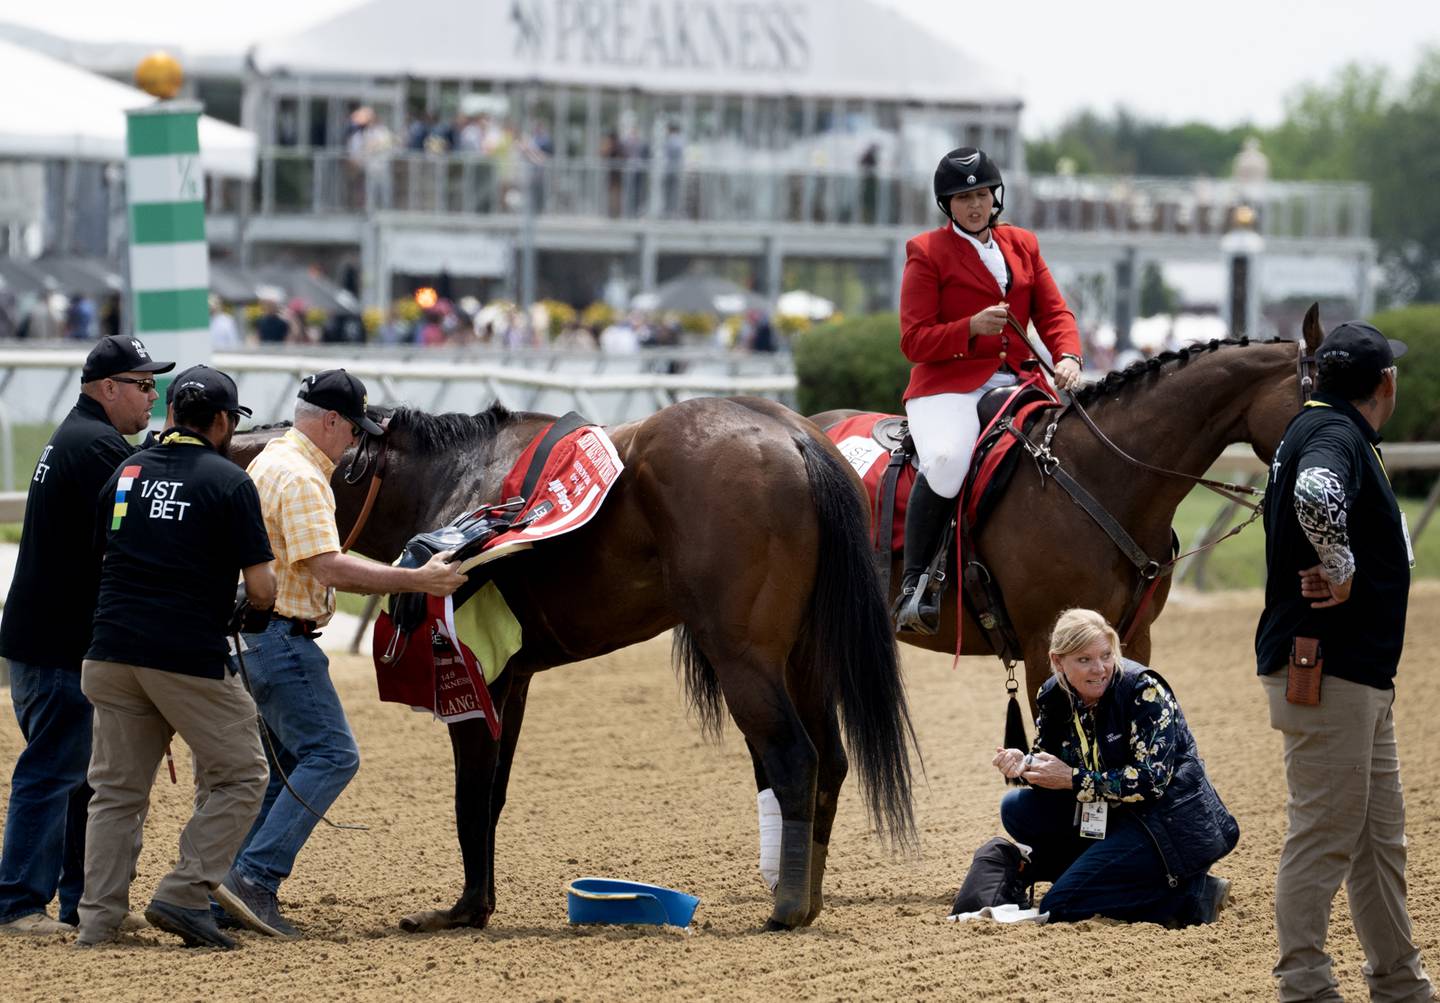 HavnameItdown is stopped by handlers during The Chick Lang Stakes race at Pimlico Race Course on May 20, 2023. The horse was humanly euthanized and jockey Luis Saez taken to the hospital.